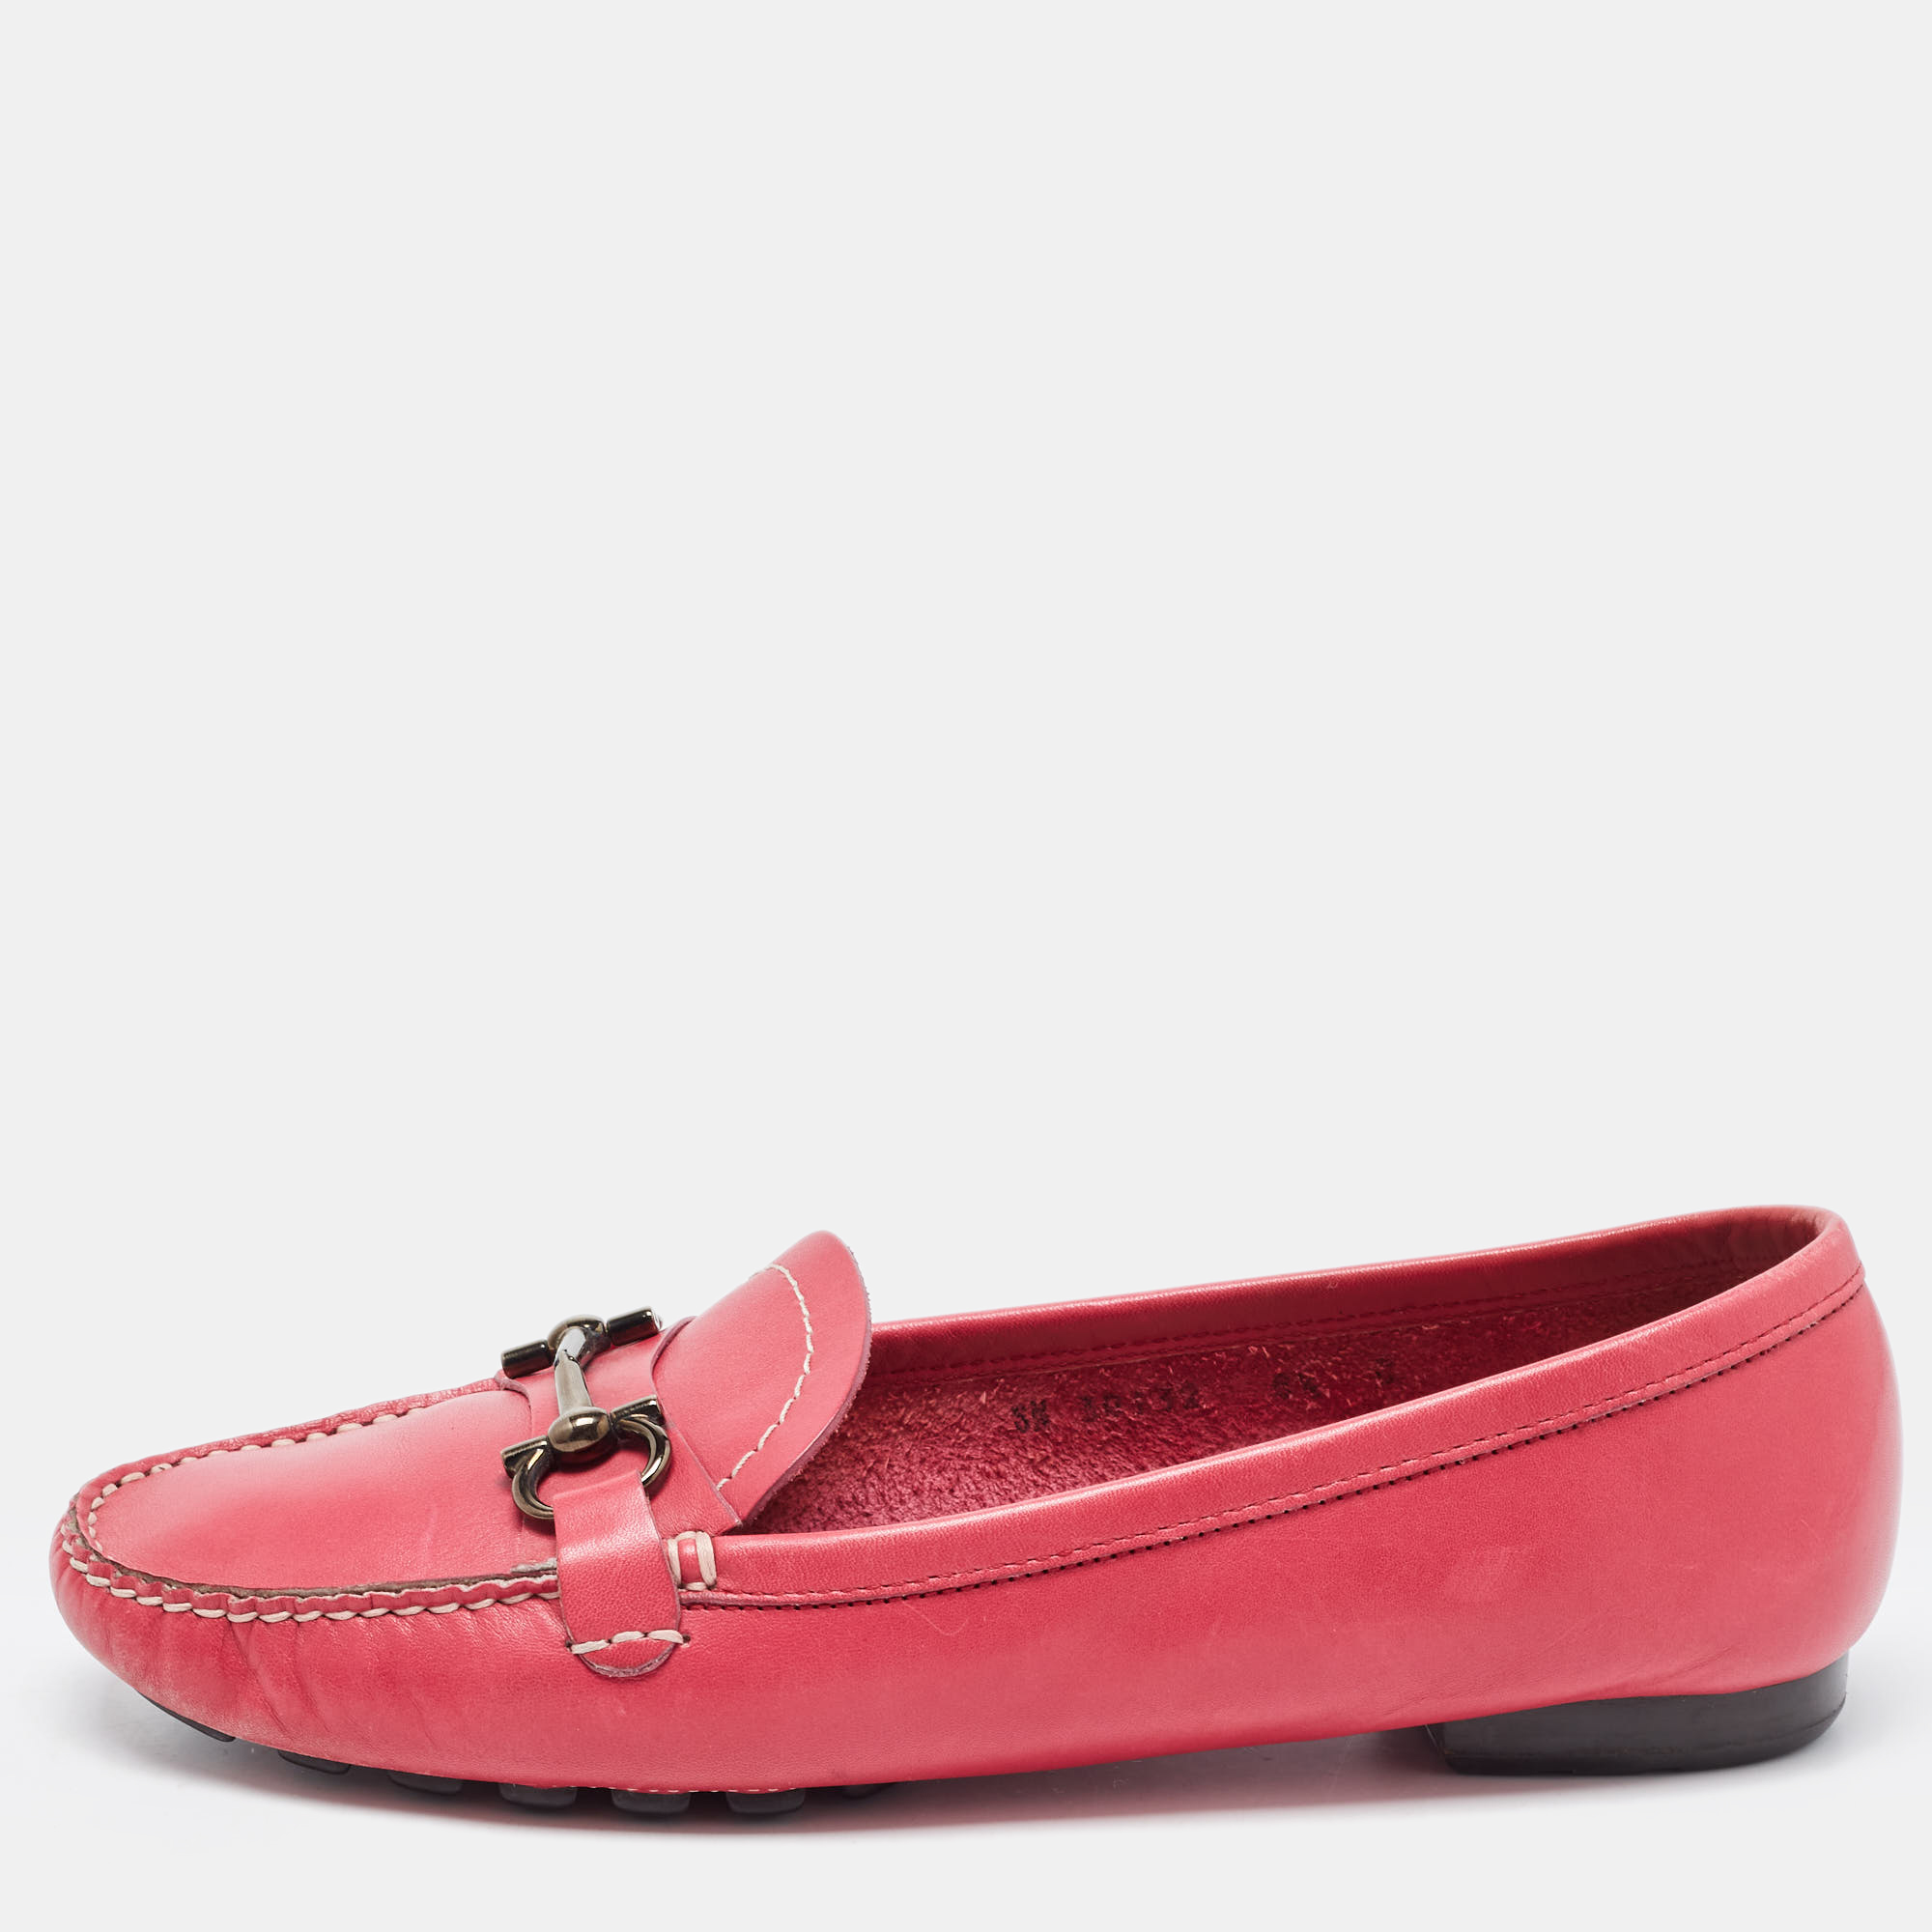 Pre-owned Ferragamo Pink Leather Gancini Bit Loafers Size 39